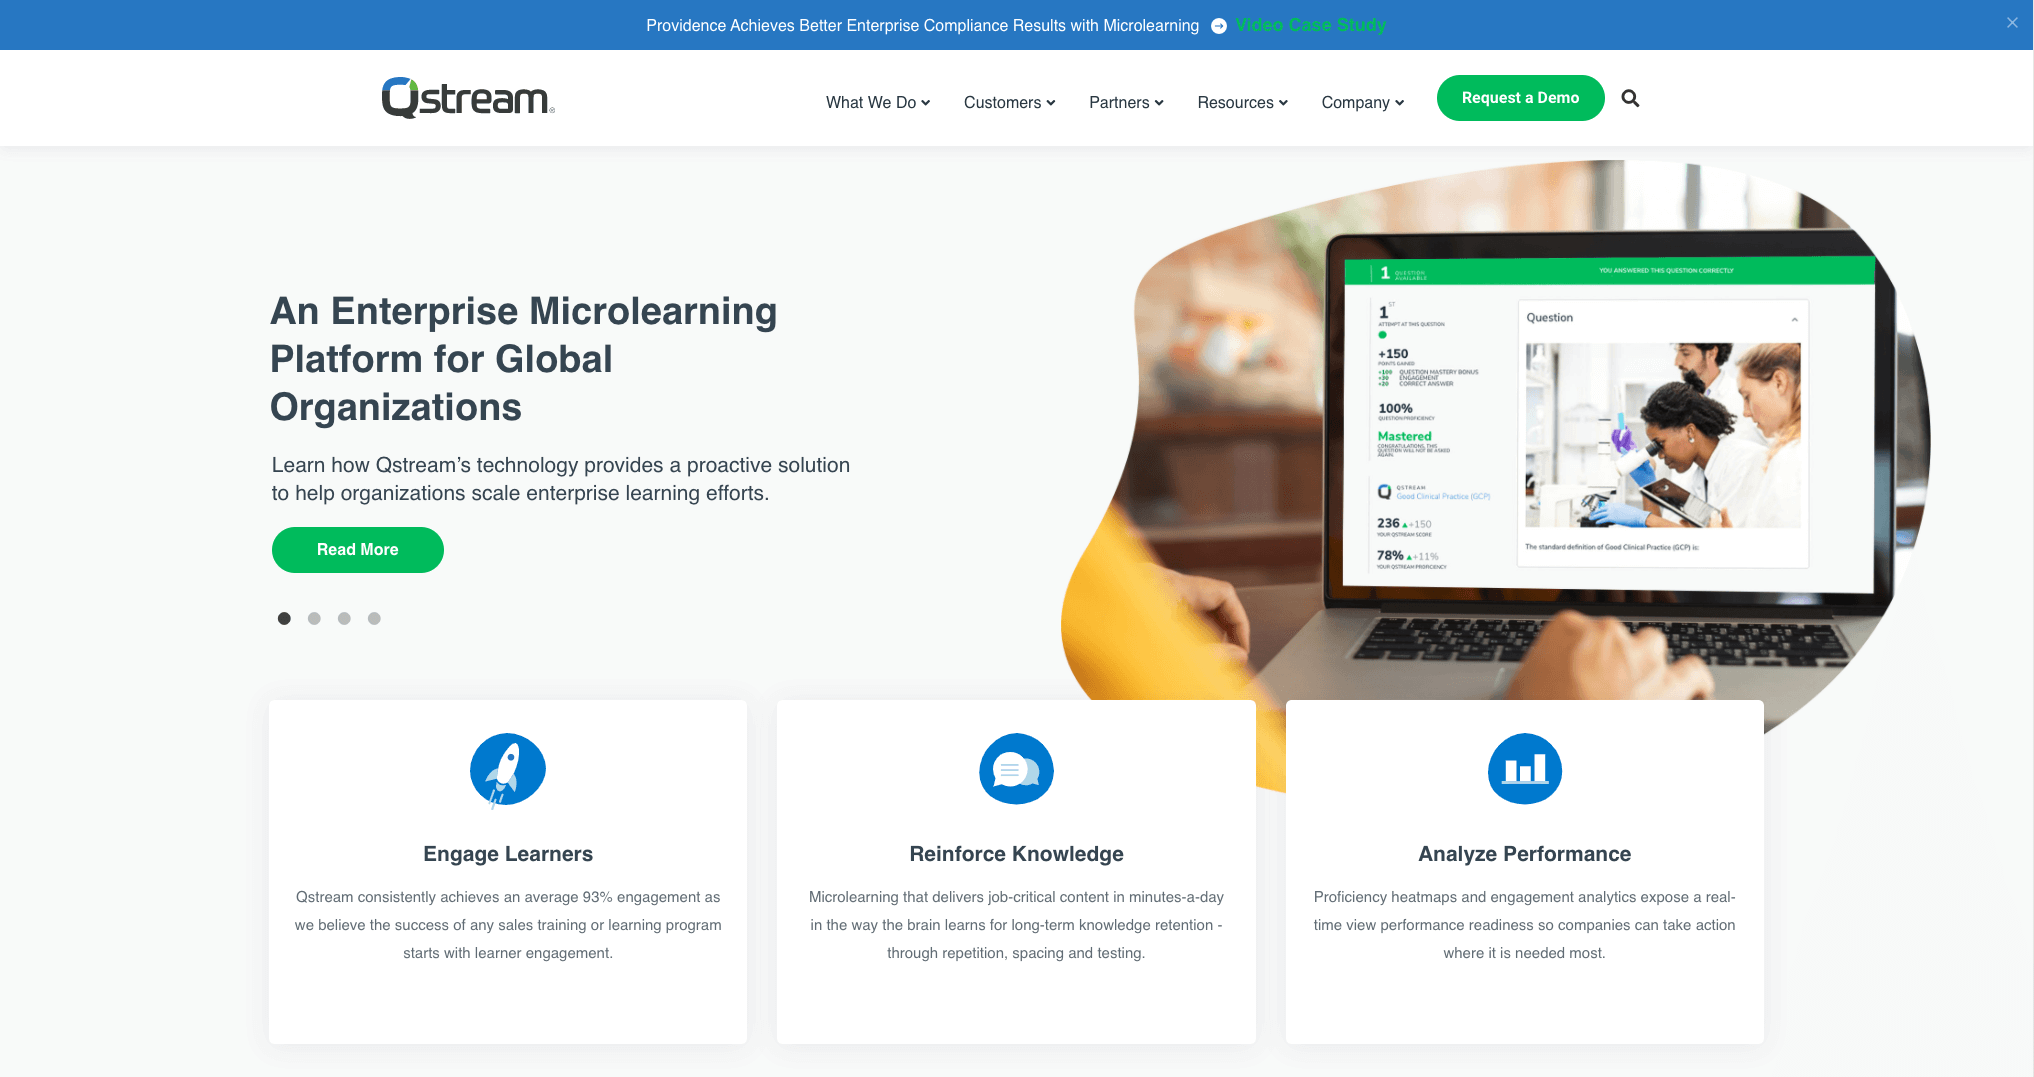 The Qstream homepage